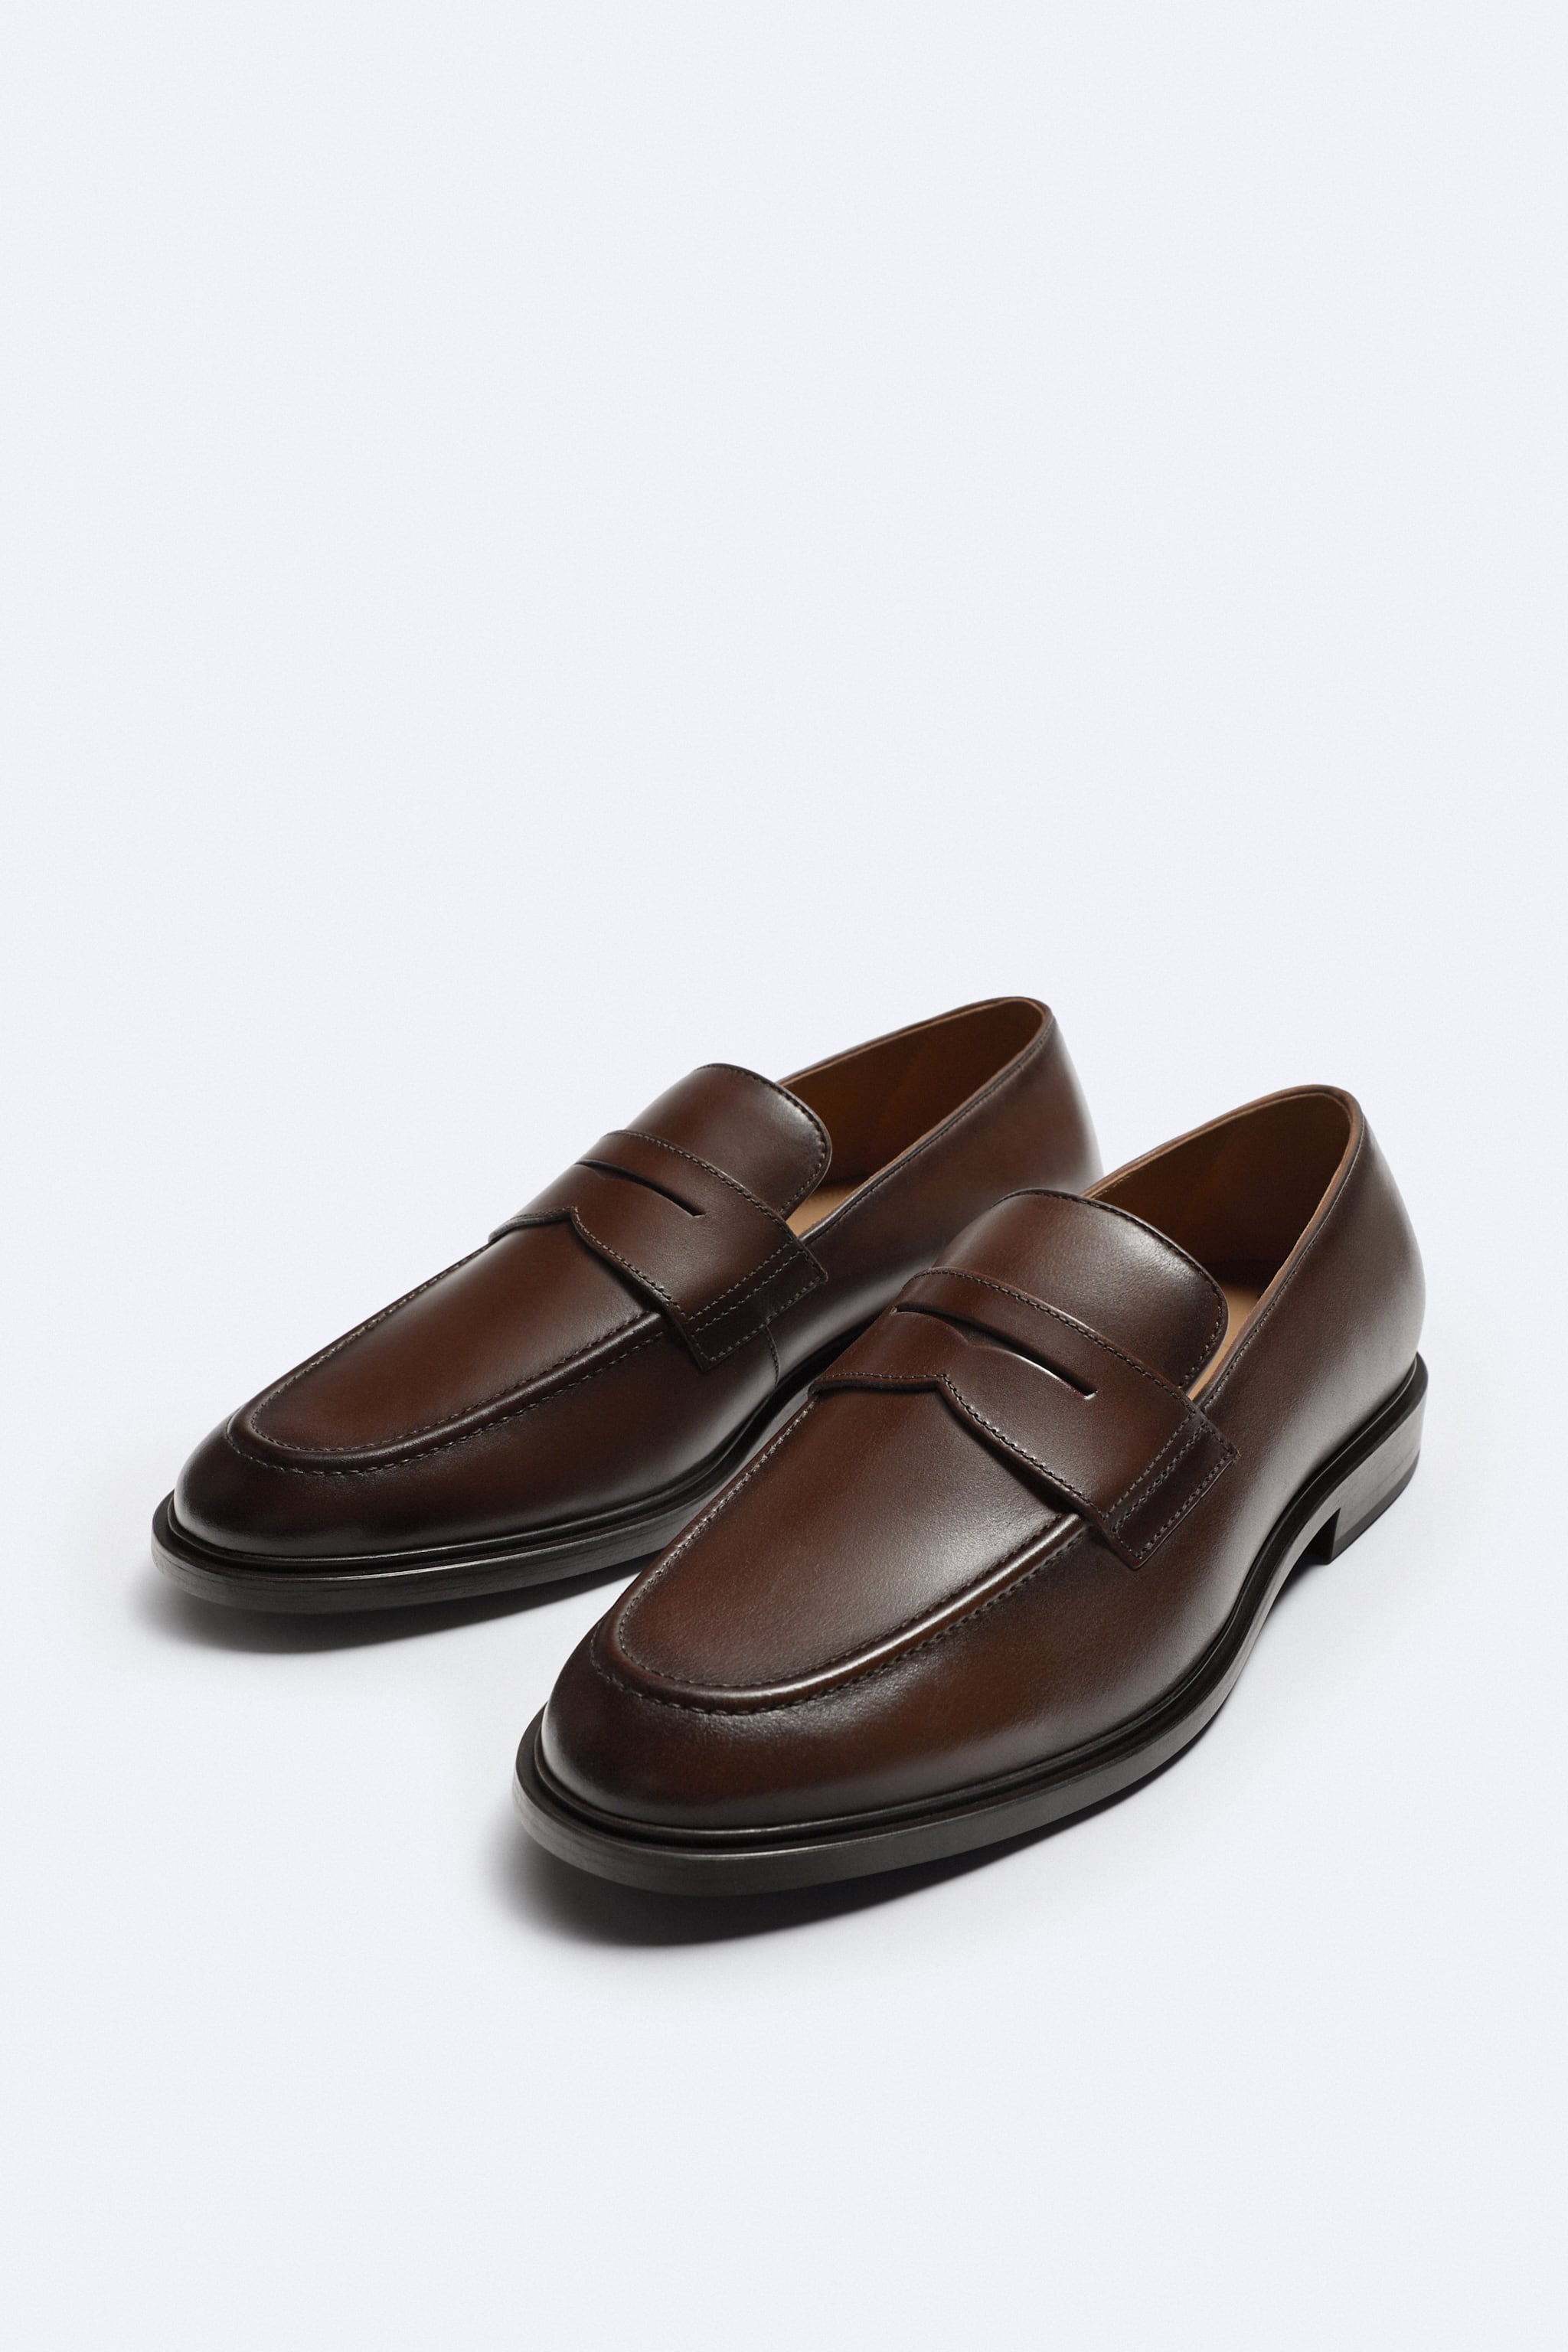 LEATHER PENNY LOAFERS